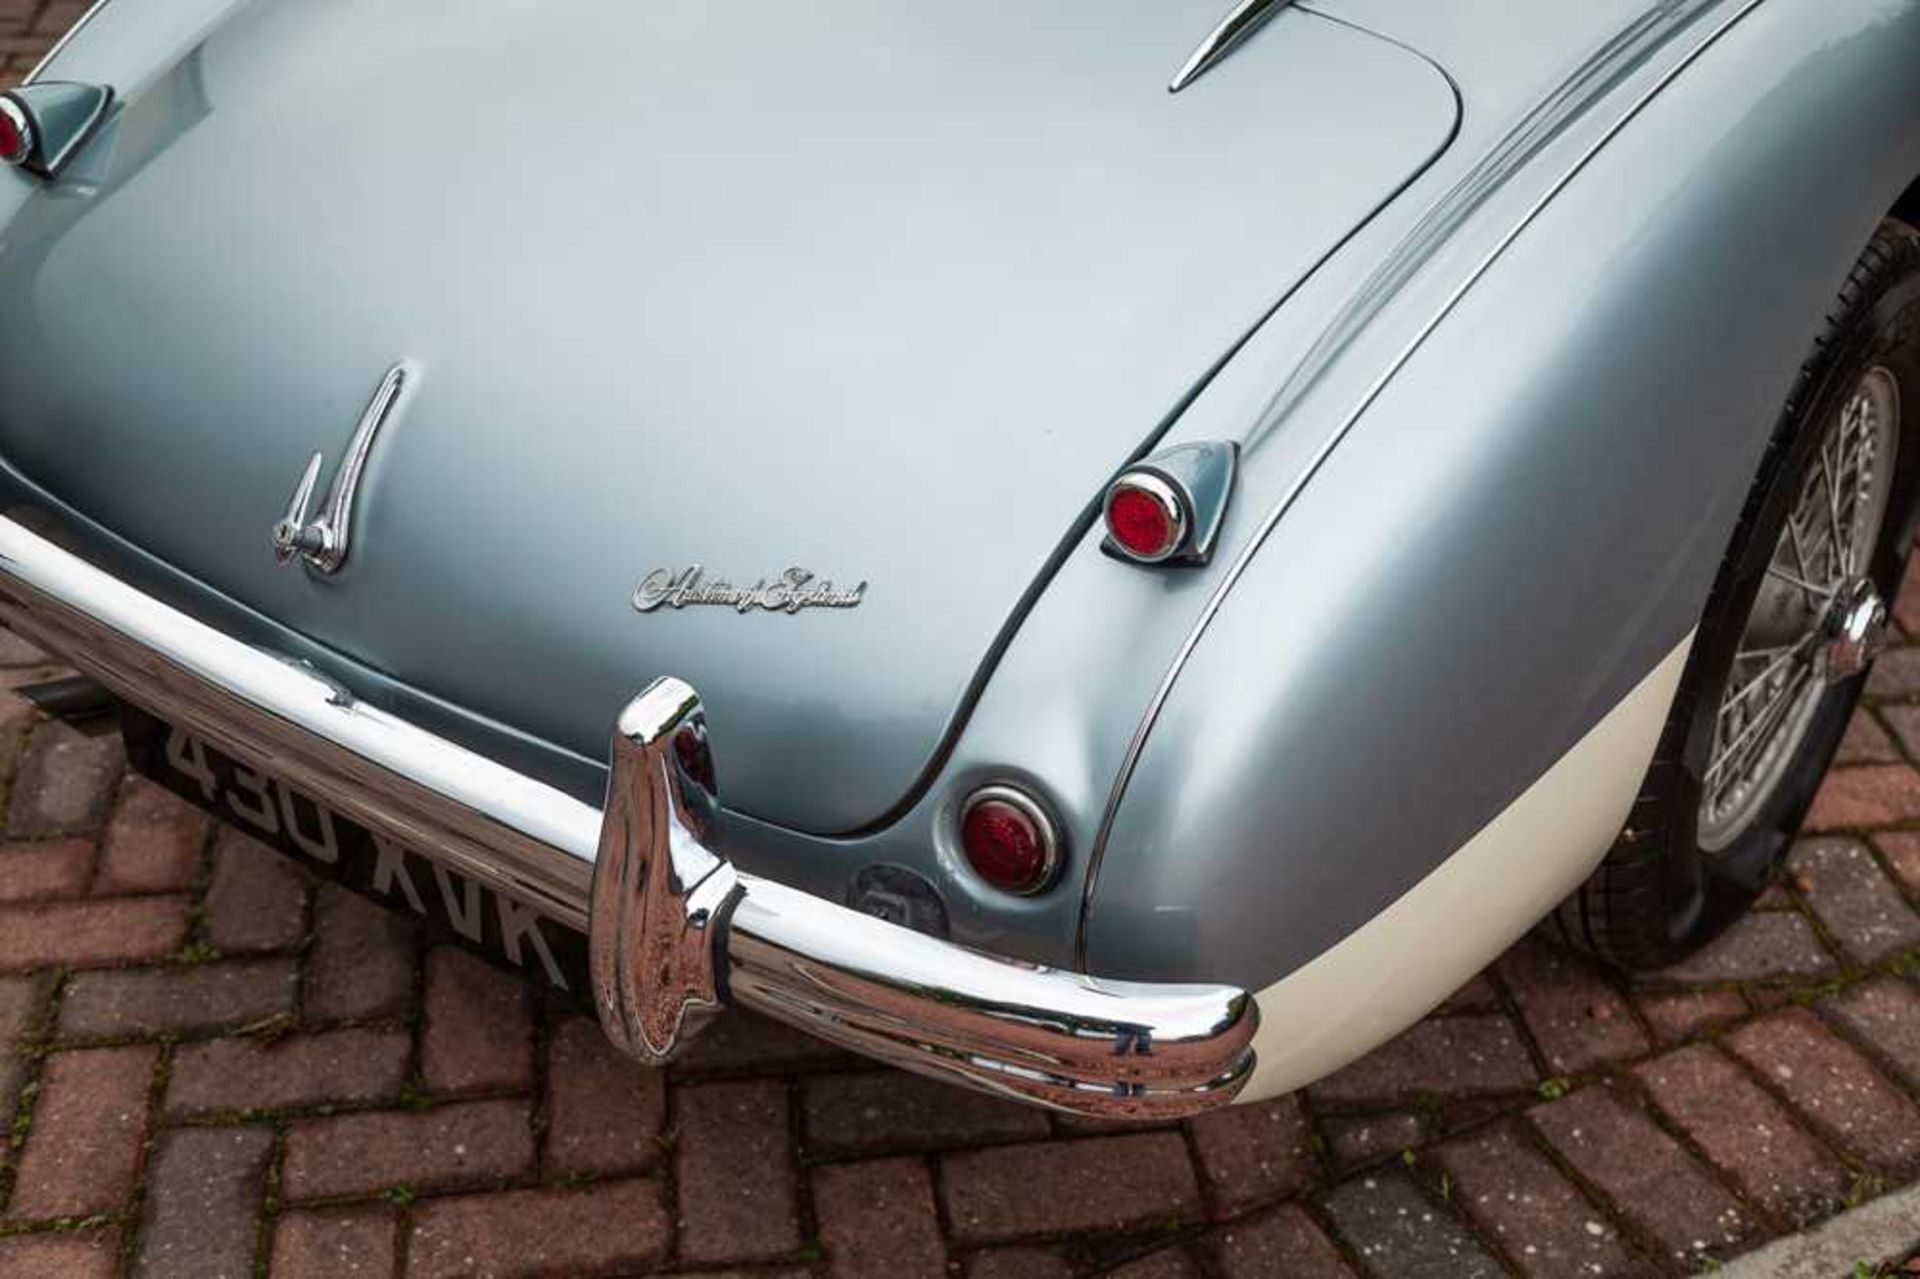 1955 Austin-Healey 100/4 Subtly Upgraded with 5-Speed Transmission and Front Disc Brakes - Image 19 of 54